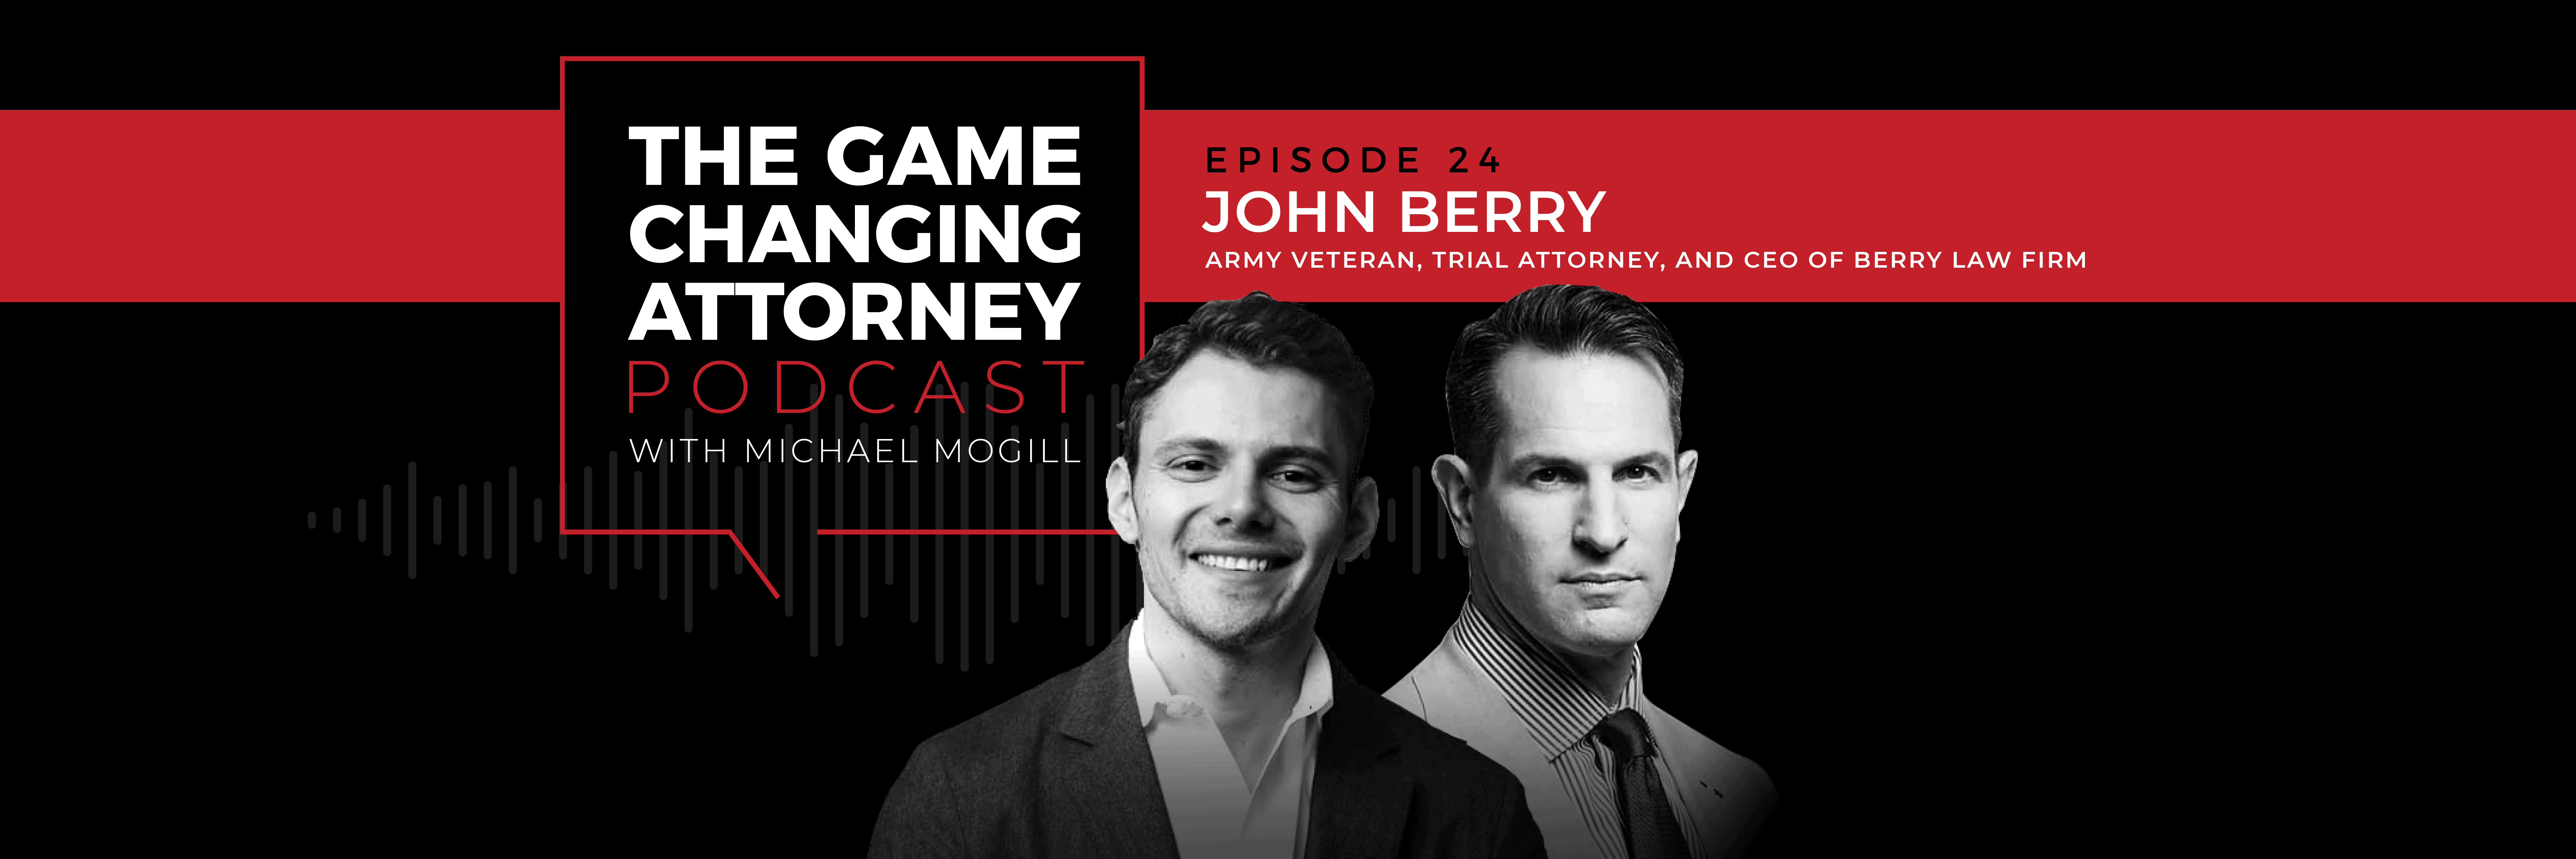 John Berry - The Game Changing Attorney Podcast - Desktop